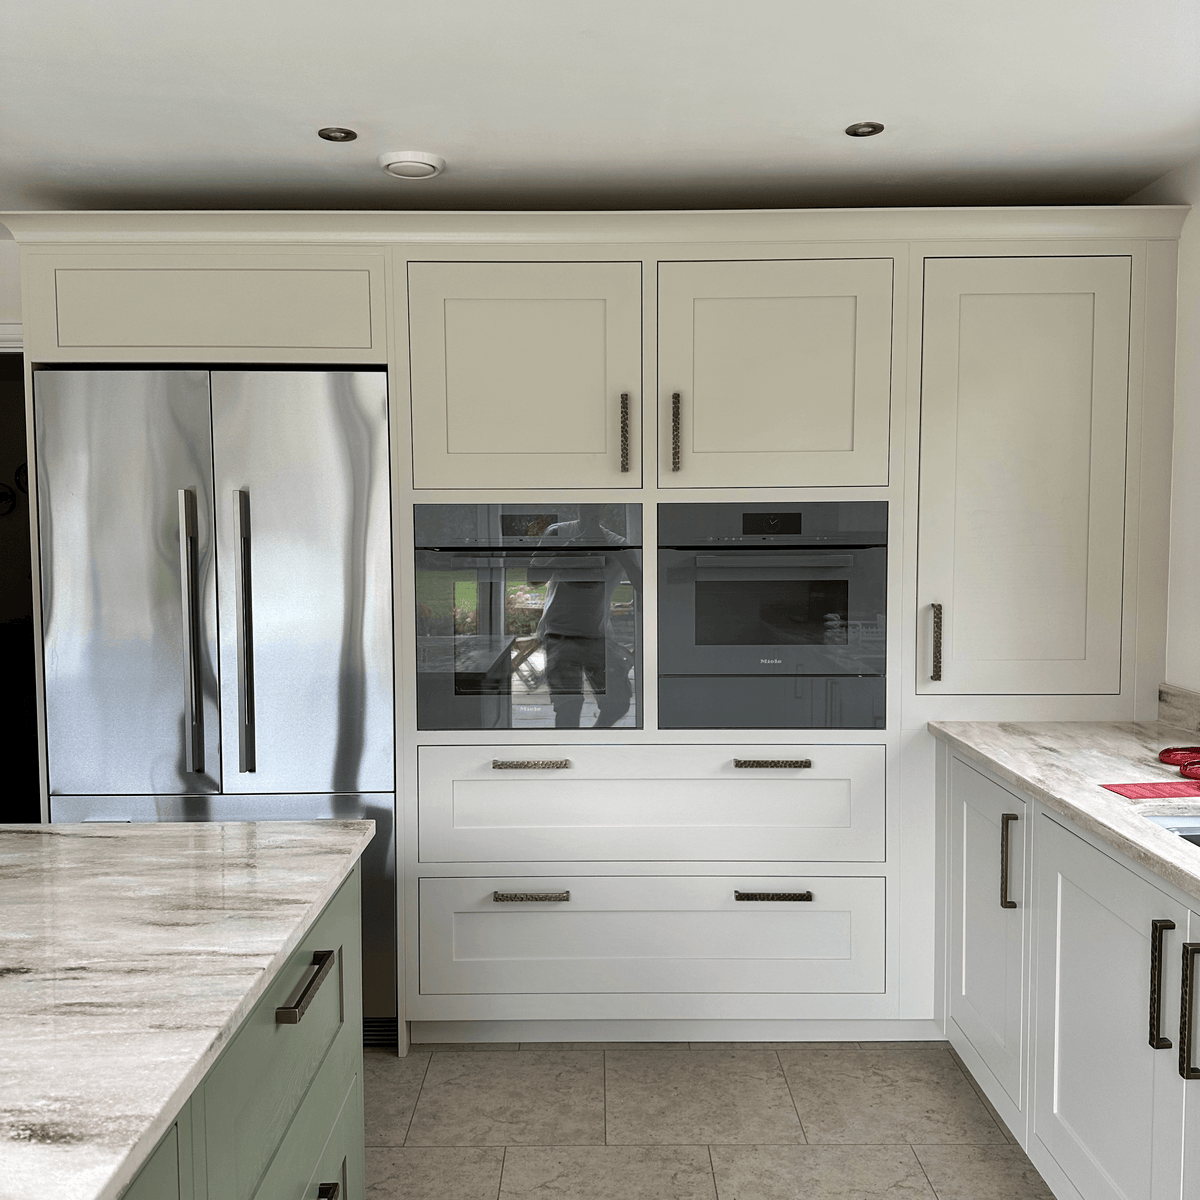 Painting Kitchen Cabinets in Hargrave, Northamptonshire